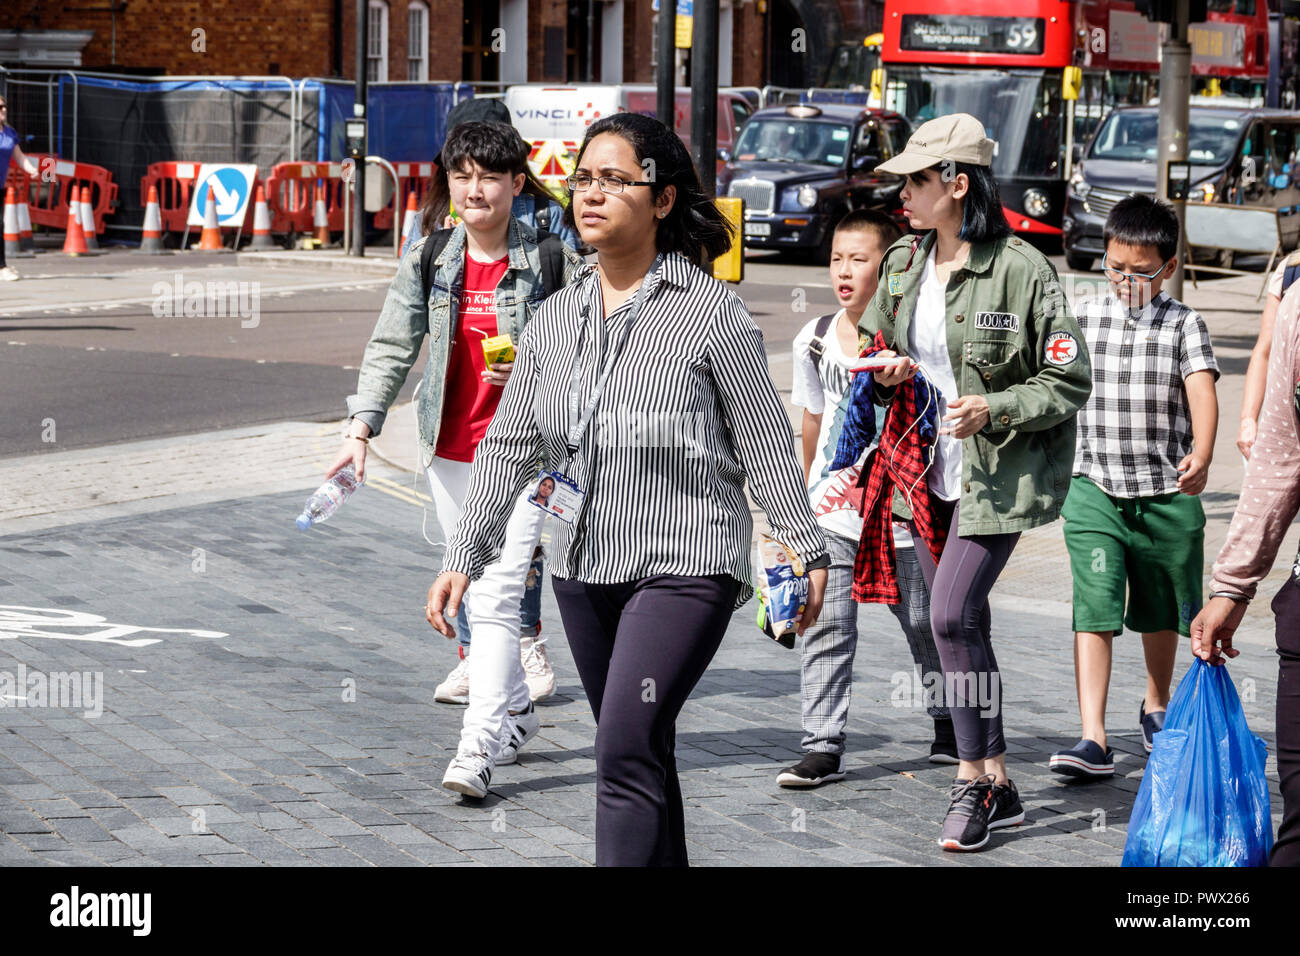 London England,UK,United Kingdom Great Britain,Lambeth South Bank,pedestrian street crossing,Asian Asians ethnic immigrant immigrants minority,adult a Stock Photo